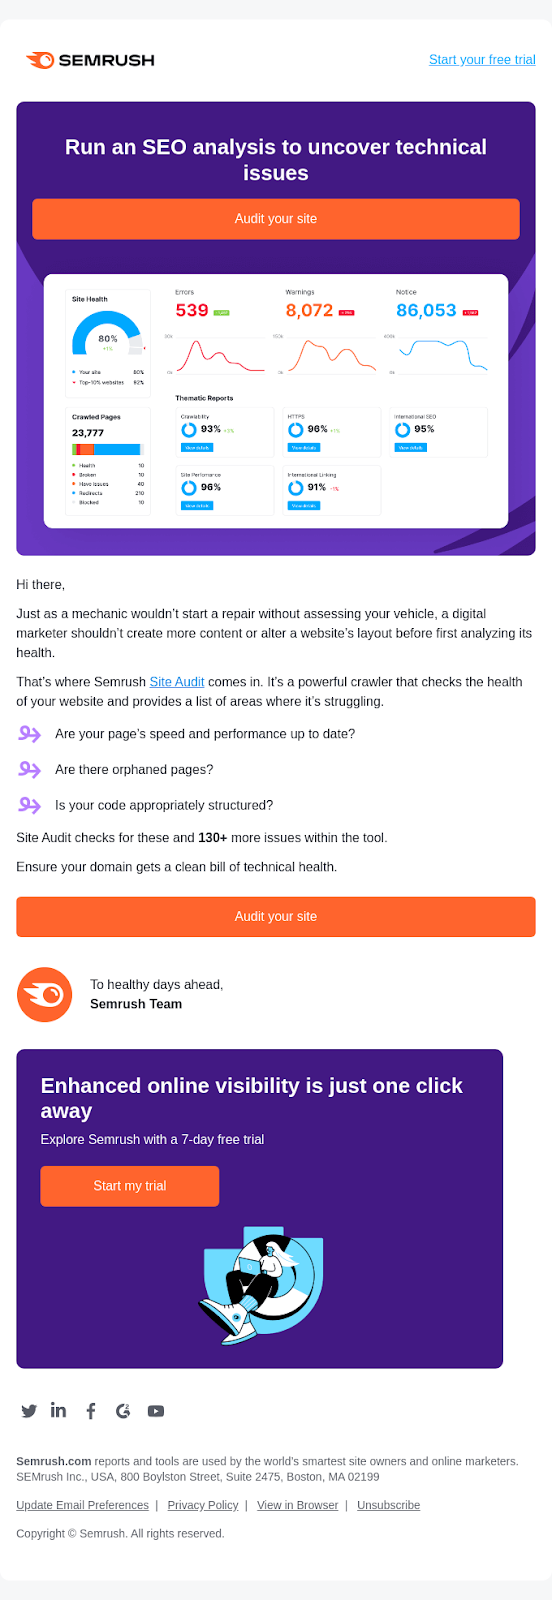 Semrush activation email template prompting a new feature